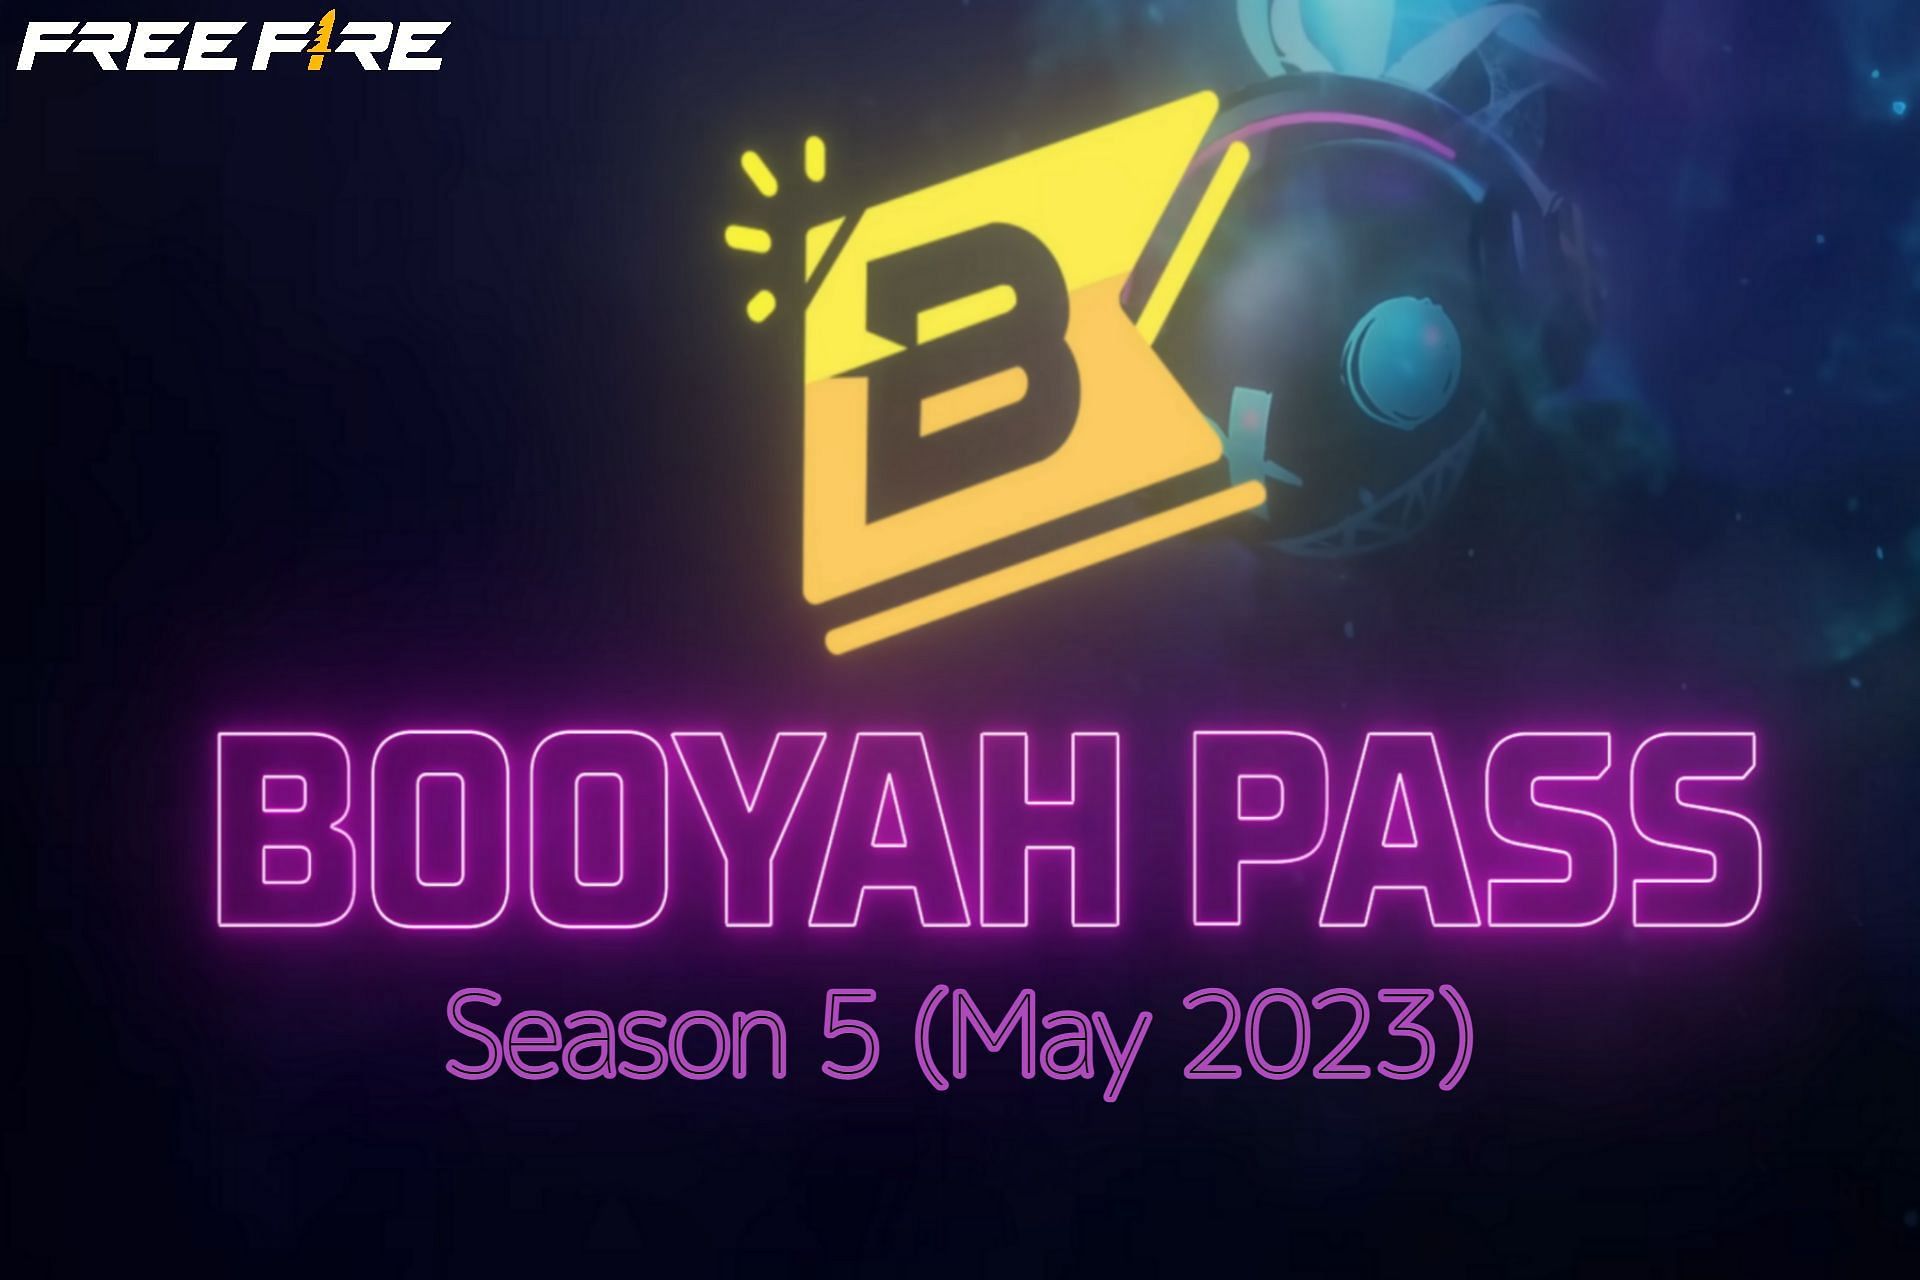 Free Fire Booyah Pass Season 5 leaks (May 2023): Freestyle Brakes Bundle,  Moonwalker Charge Buster, and more revealed